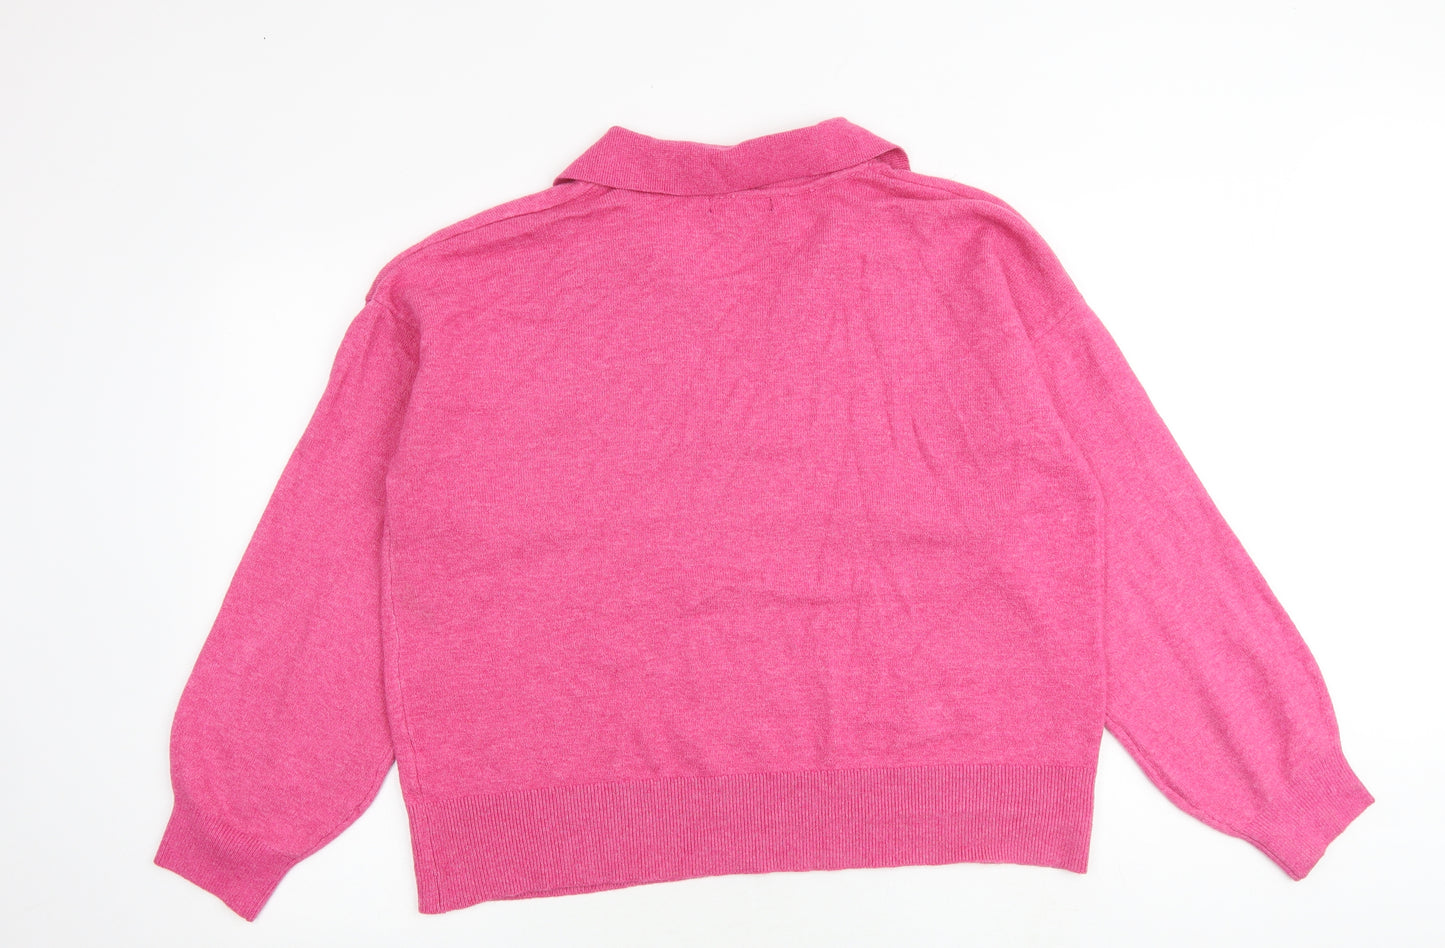 Marks and Spencer Womens Pink Collared Polyester Pullover Jumper Size L